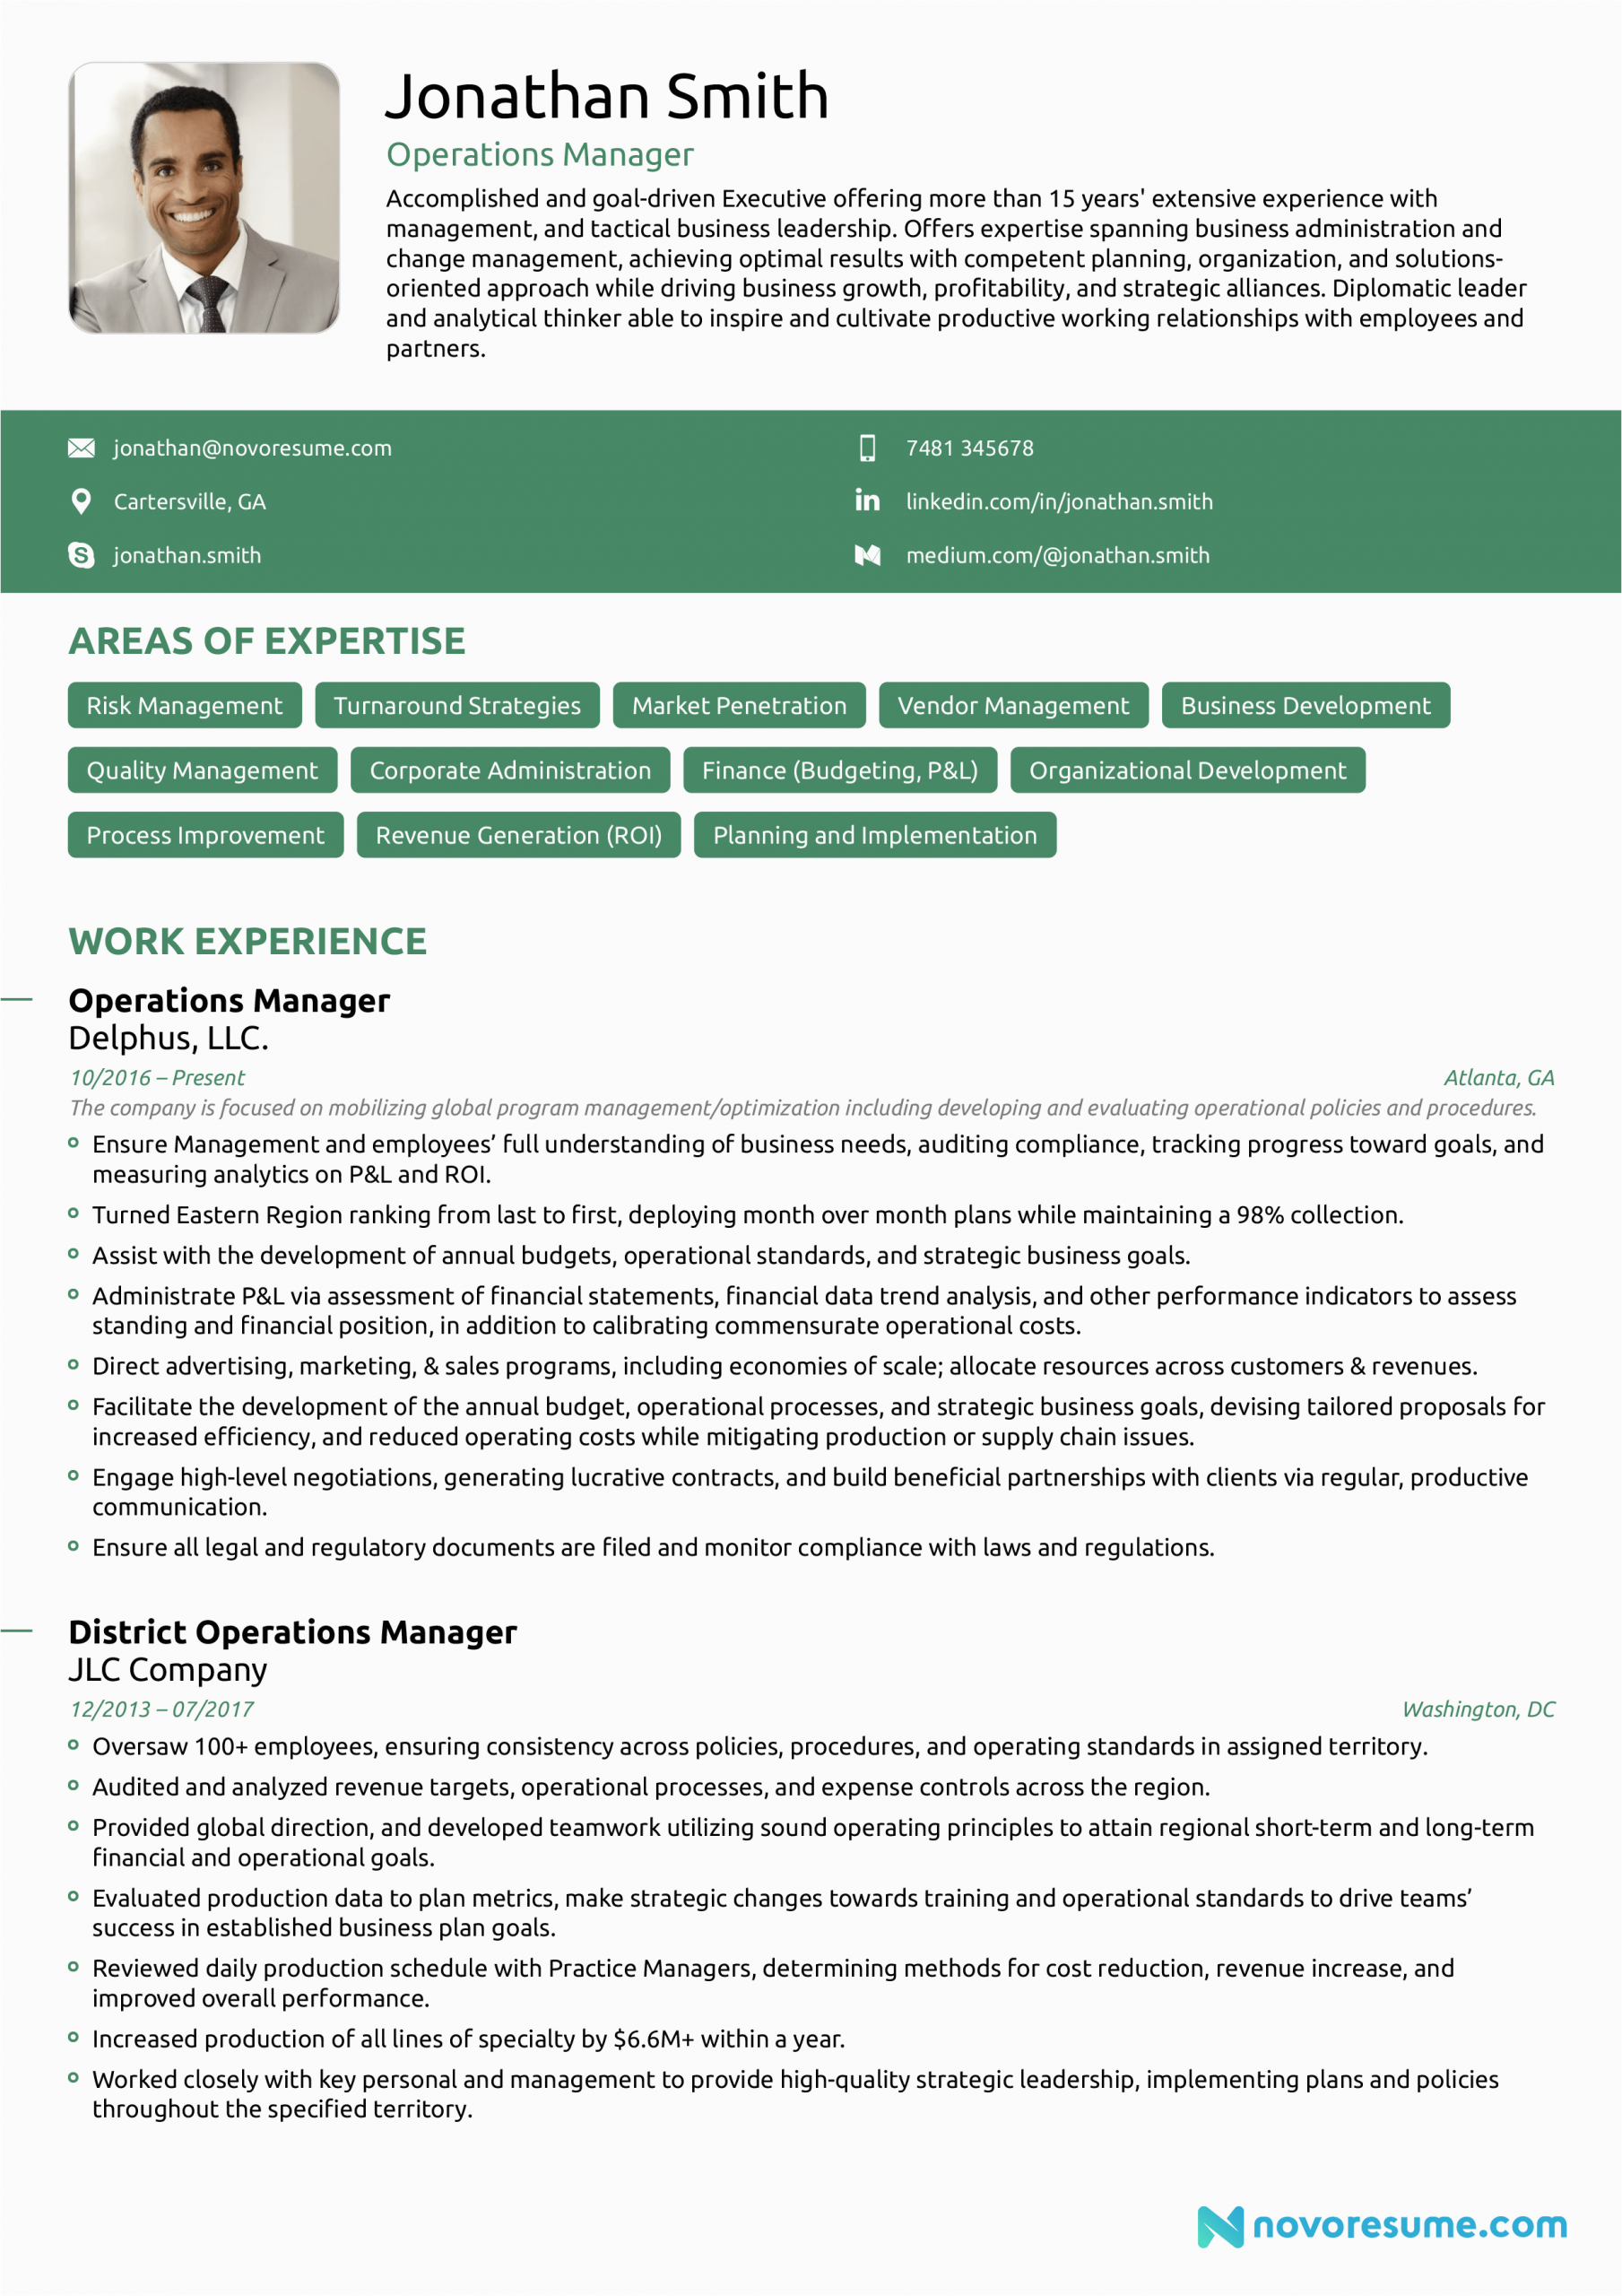 Resume Summary Sample for Operations Manager Operations Manager Resume Examples & Guide for 2021